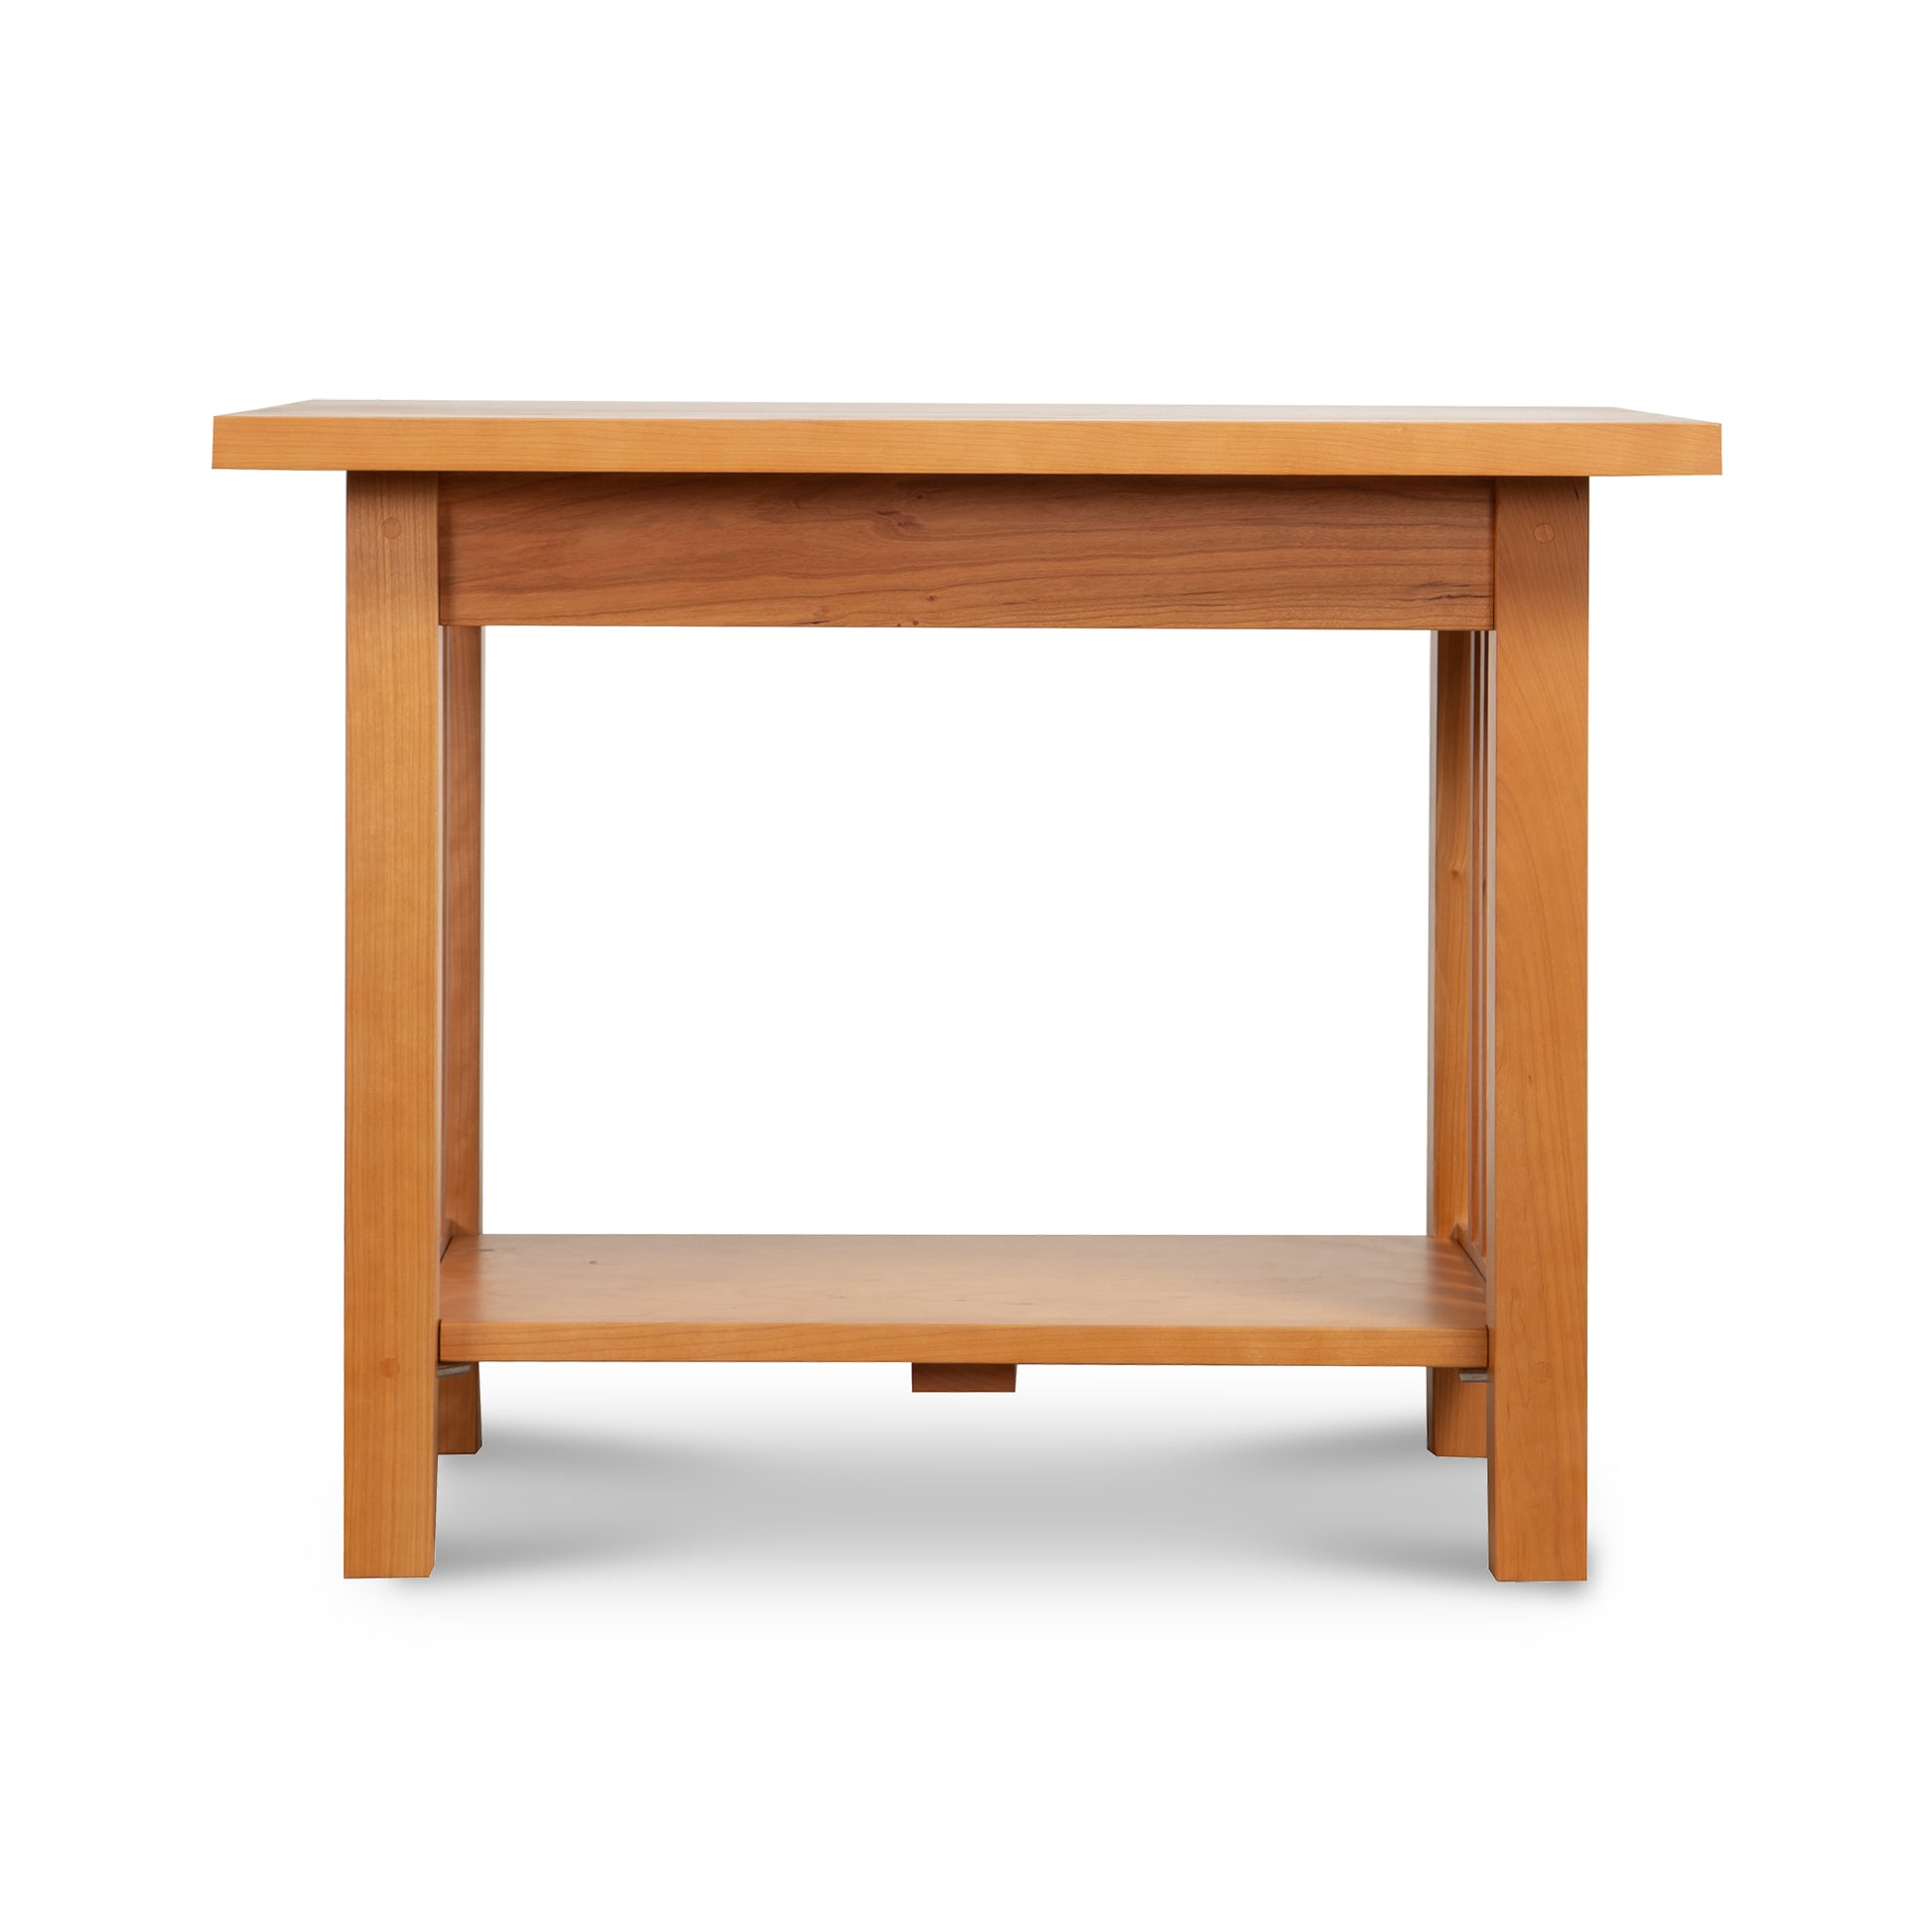 A small American Mission End Table with Shelf - Clearance, made in Vermont by Lyndon Furniture, with a beautiful natural finish.